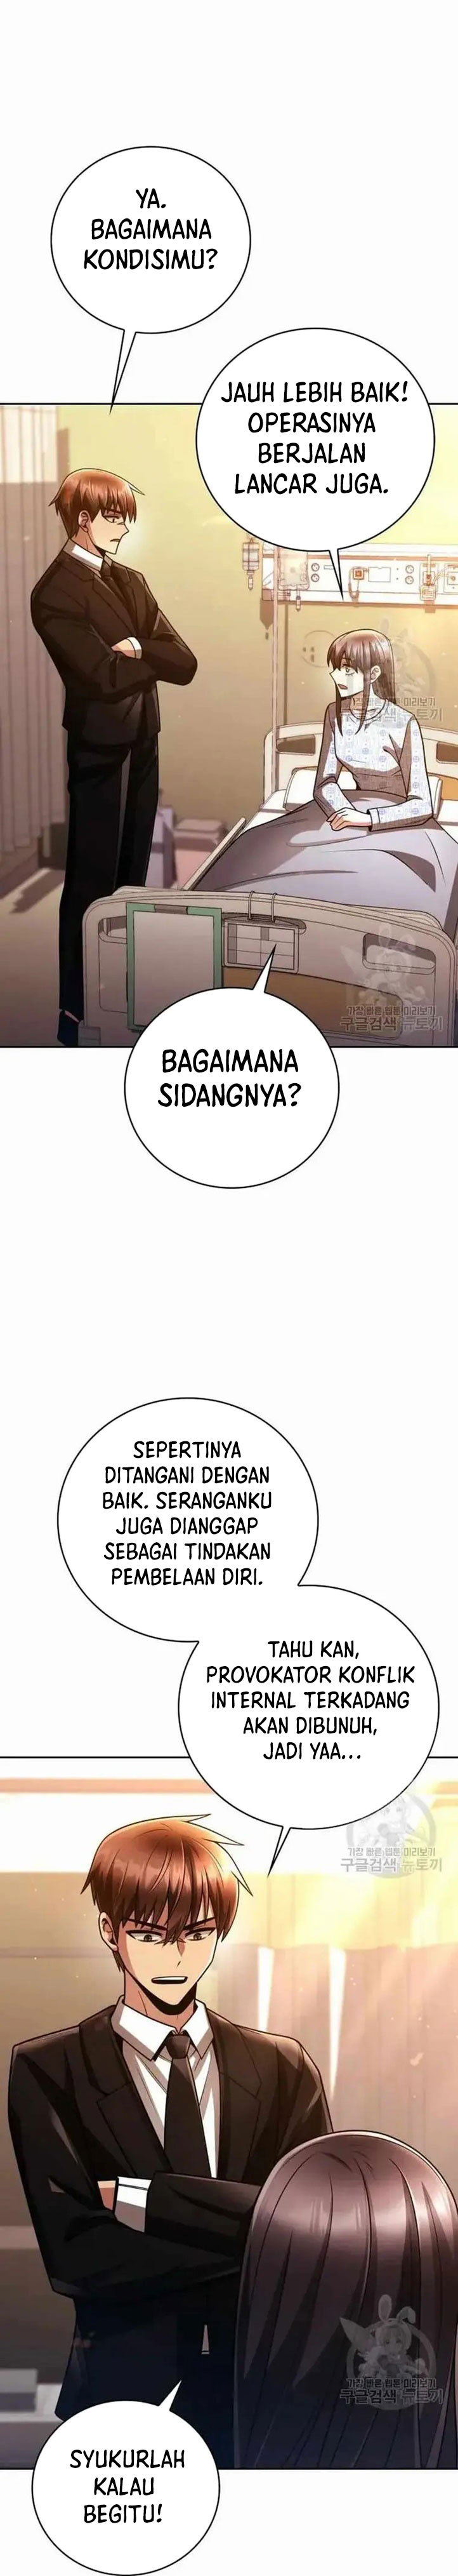 Dilarang COPAS - situs resmi www.mangacanblog.com - Komik clever cleaning life of the returned genius hunter 037 - chapter 37 38 Indonesia clever cleaning life of the returned genius hunter 037 - chapter 37 Terbaru 35|Baca Manga Komik Indonesia|Mangacan